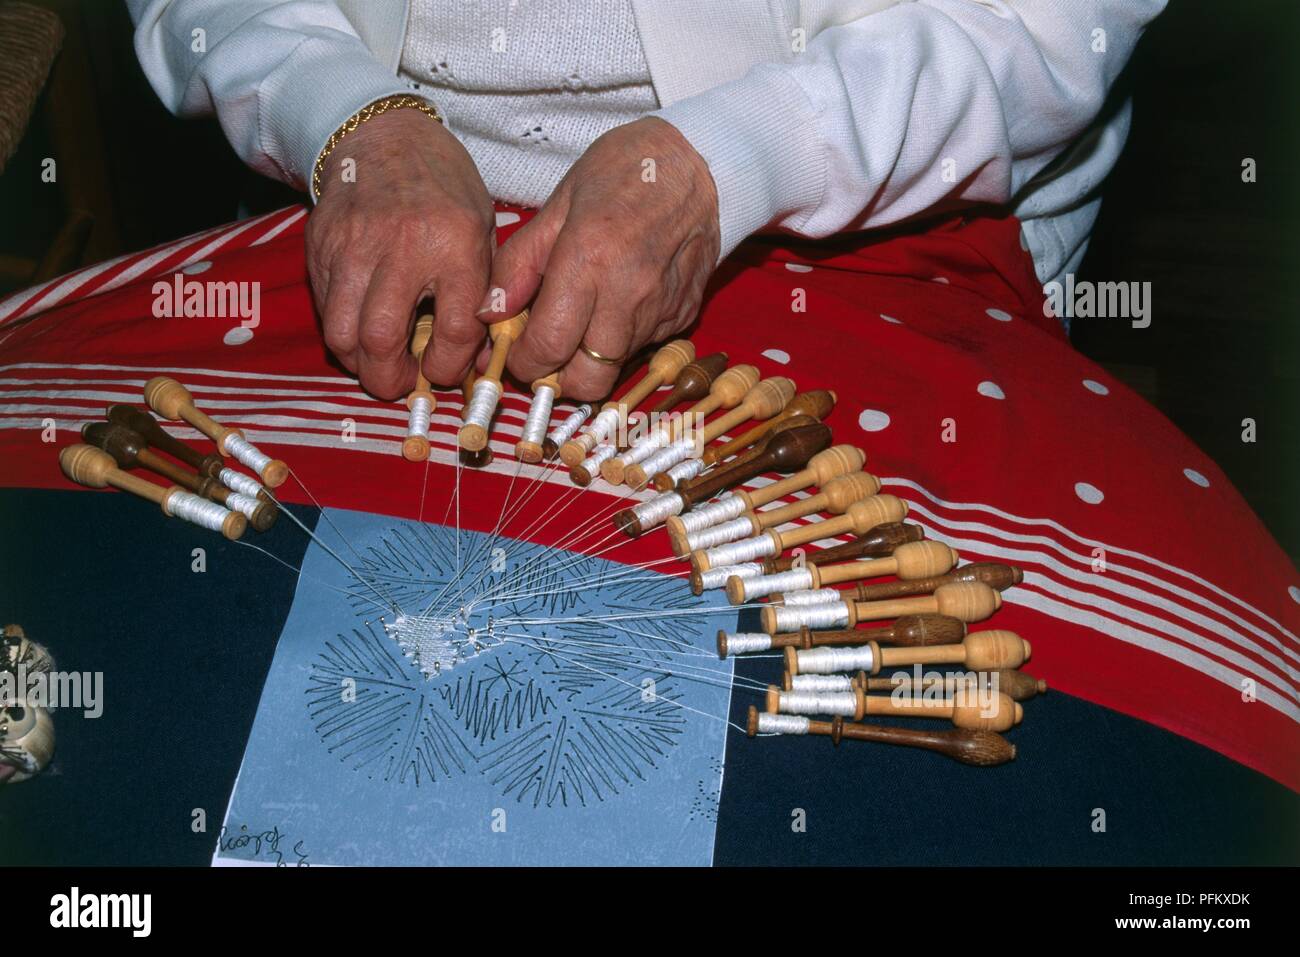 Belgium, Bruges, close-up of woman's hands making lace with bobbins on lap Stock Photo